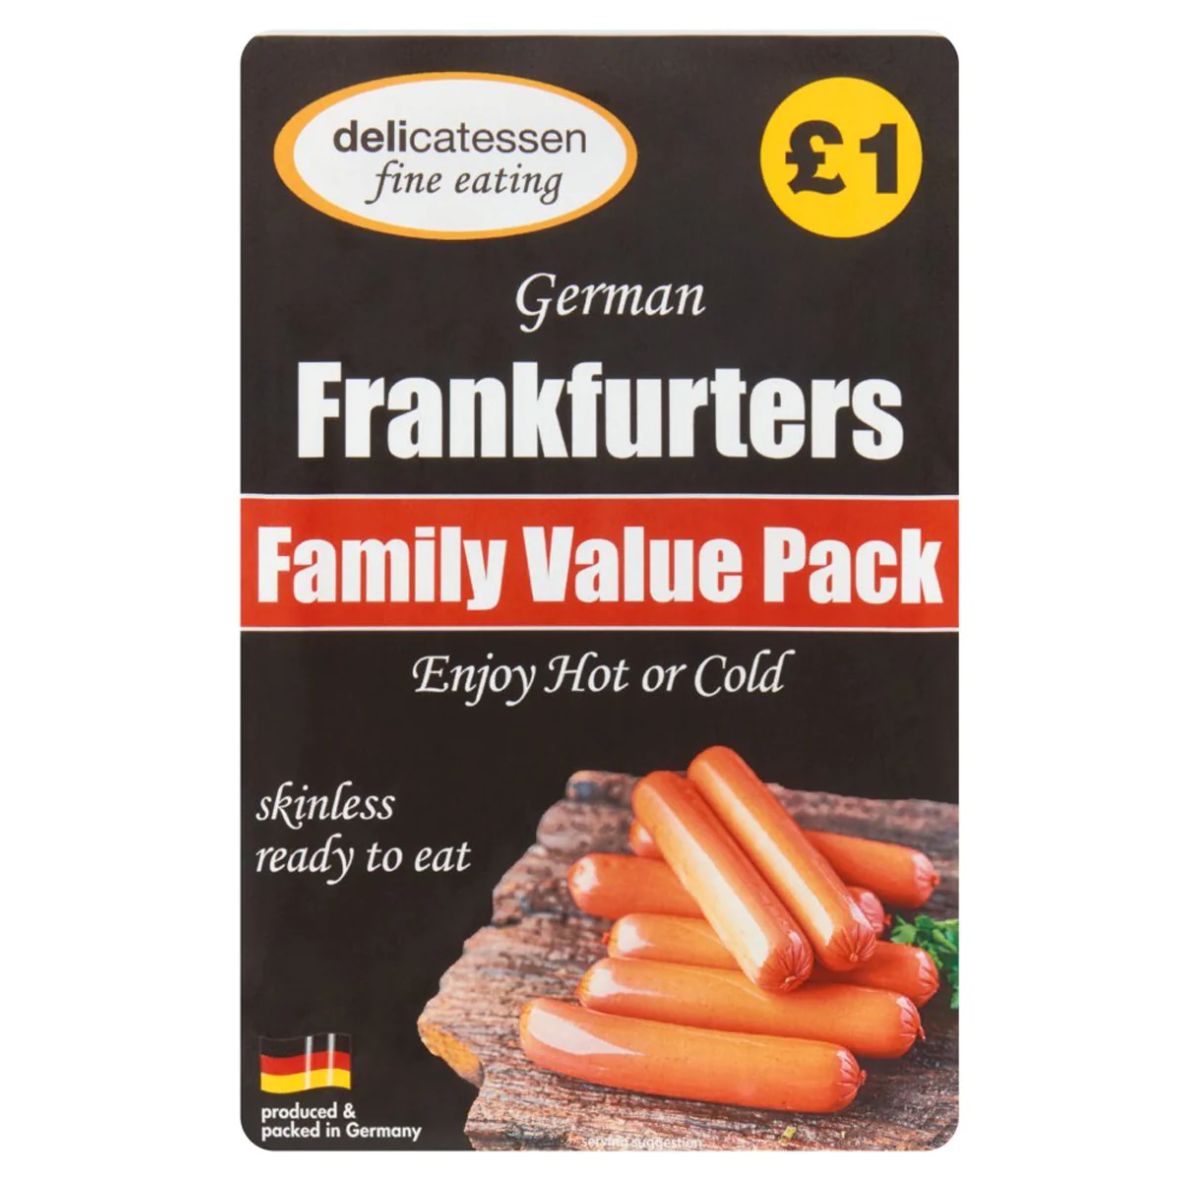 Packaging for the Delicatessen Fine Eating - German Frankfurters Family Value Pack - 12pcs, indicating they are skinless and ready to eat either hot or cold, with a price tag of £1.